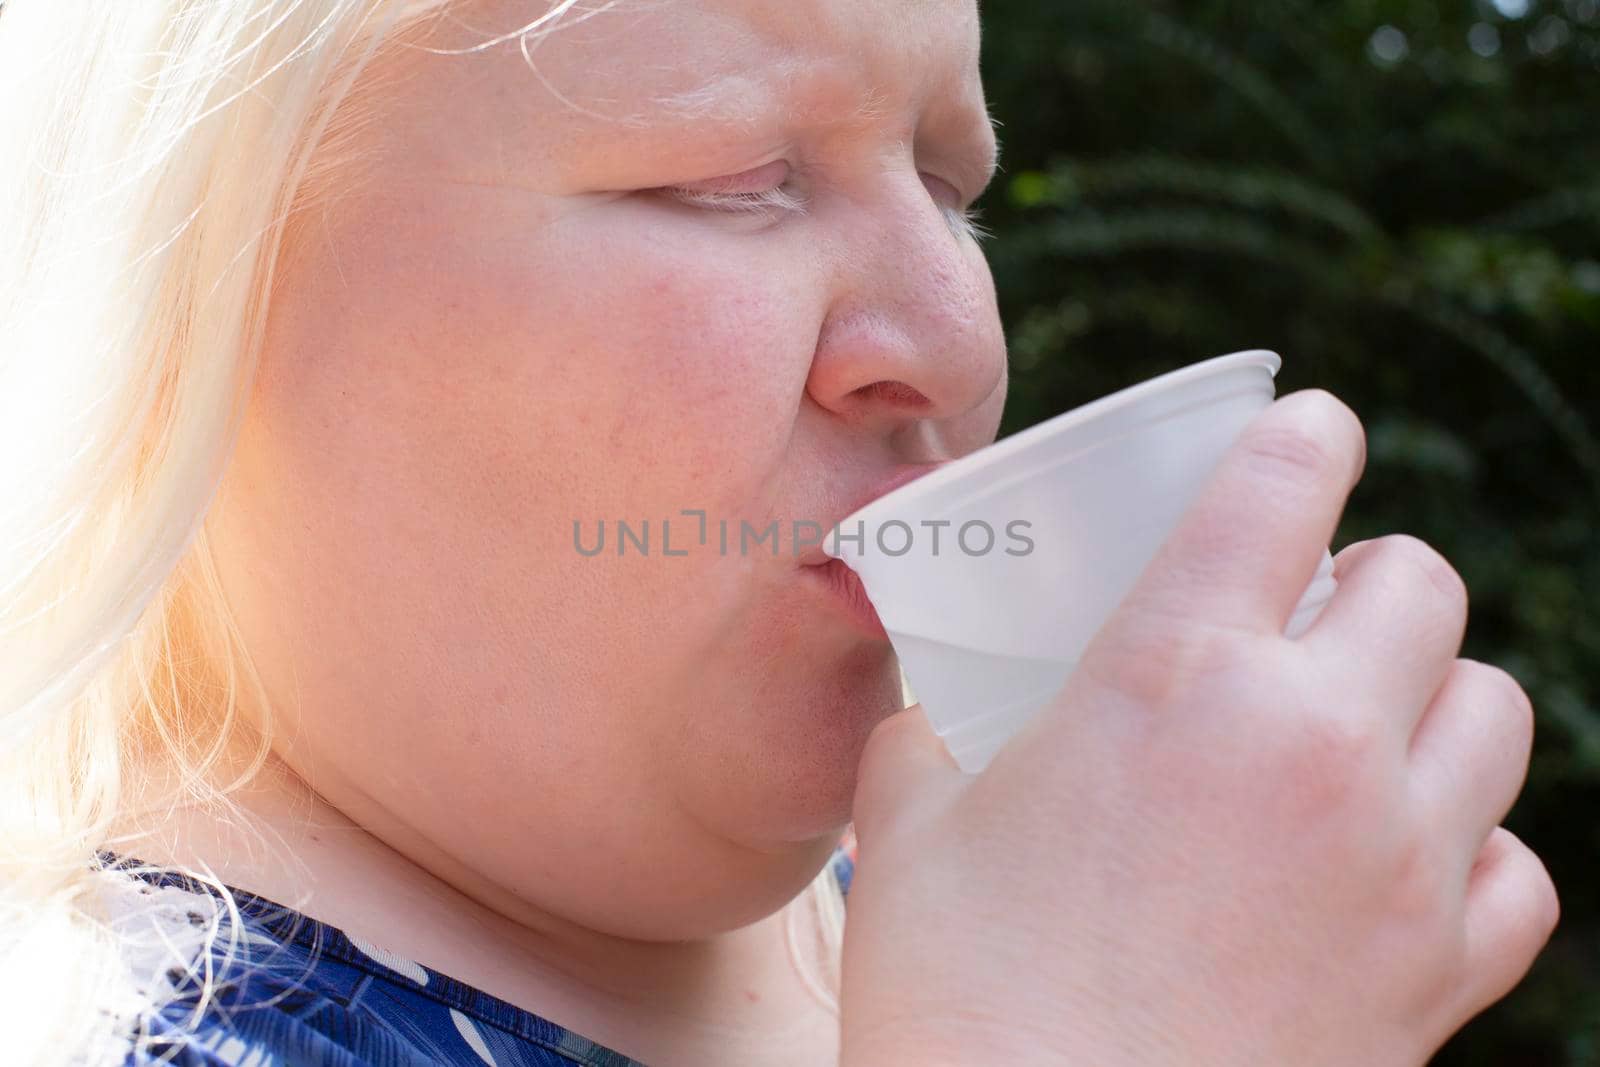 Albino woman enjoying a glass of water in a plastic cup